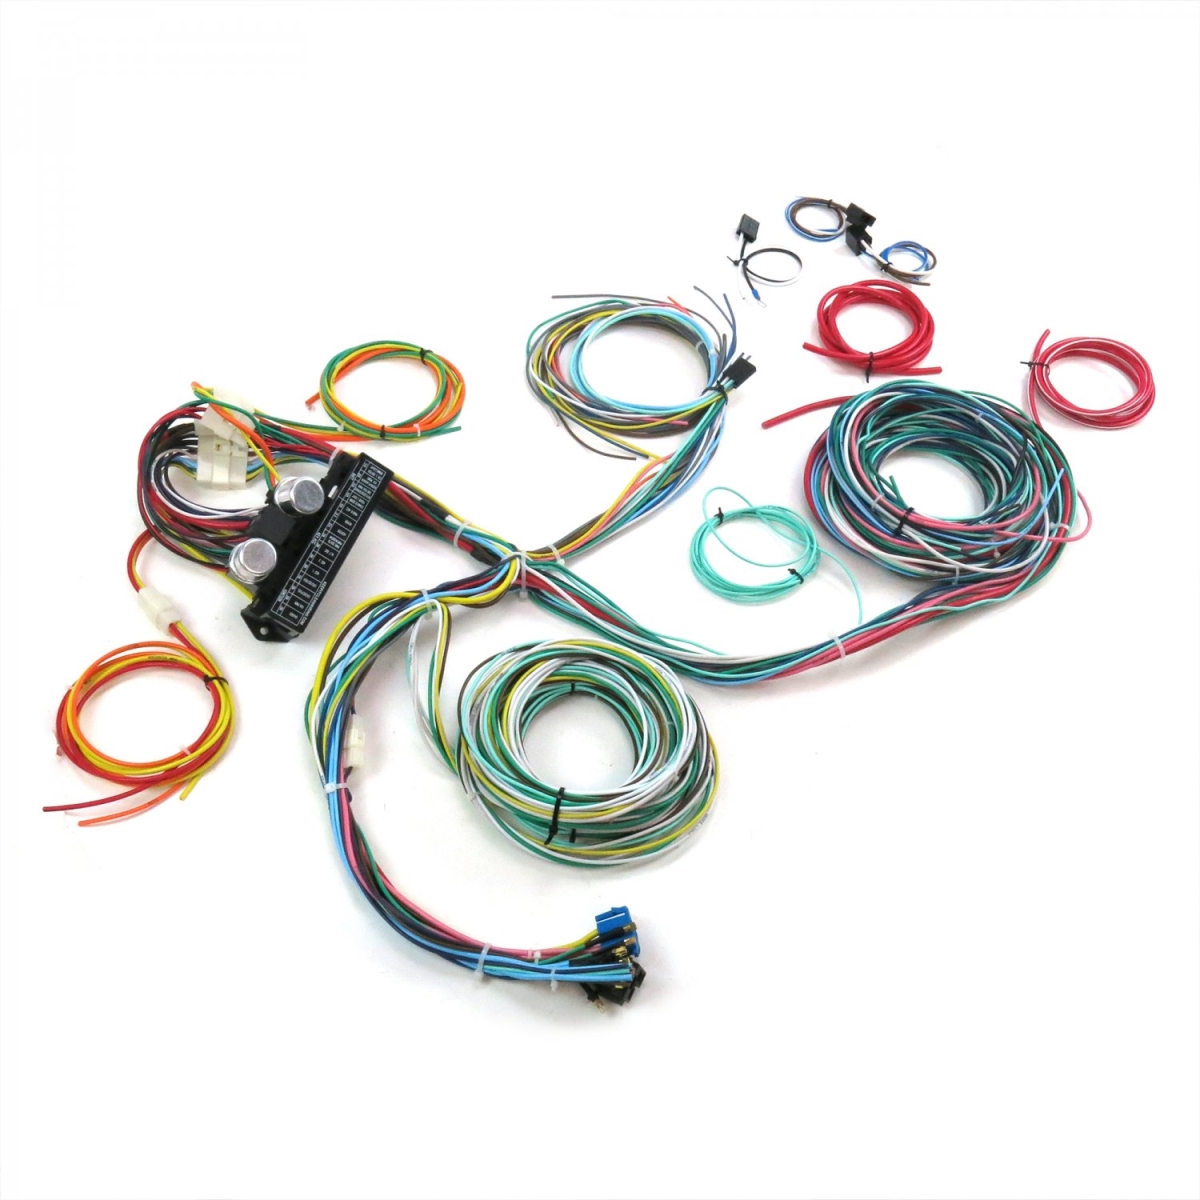 689865 KIC 15 Fuse 12V Conversion Wire Harness for 48 1948 Ford Sedan - Standard, Deluxe & Super Tudor Fordor 2-door 4-door -  Keep it Clean Wiring